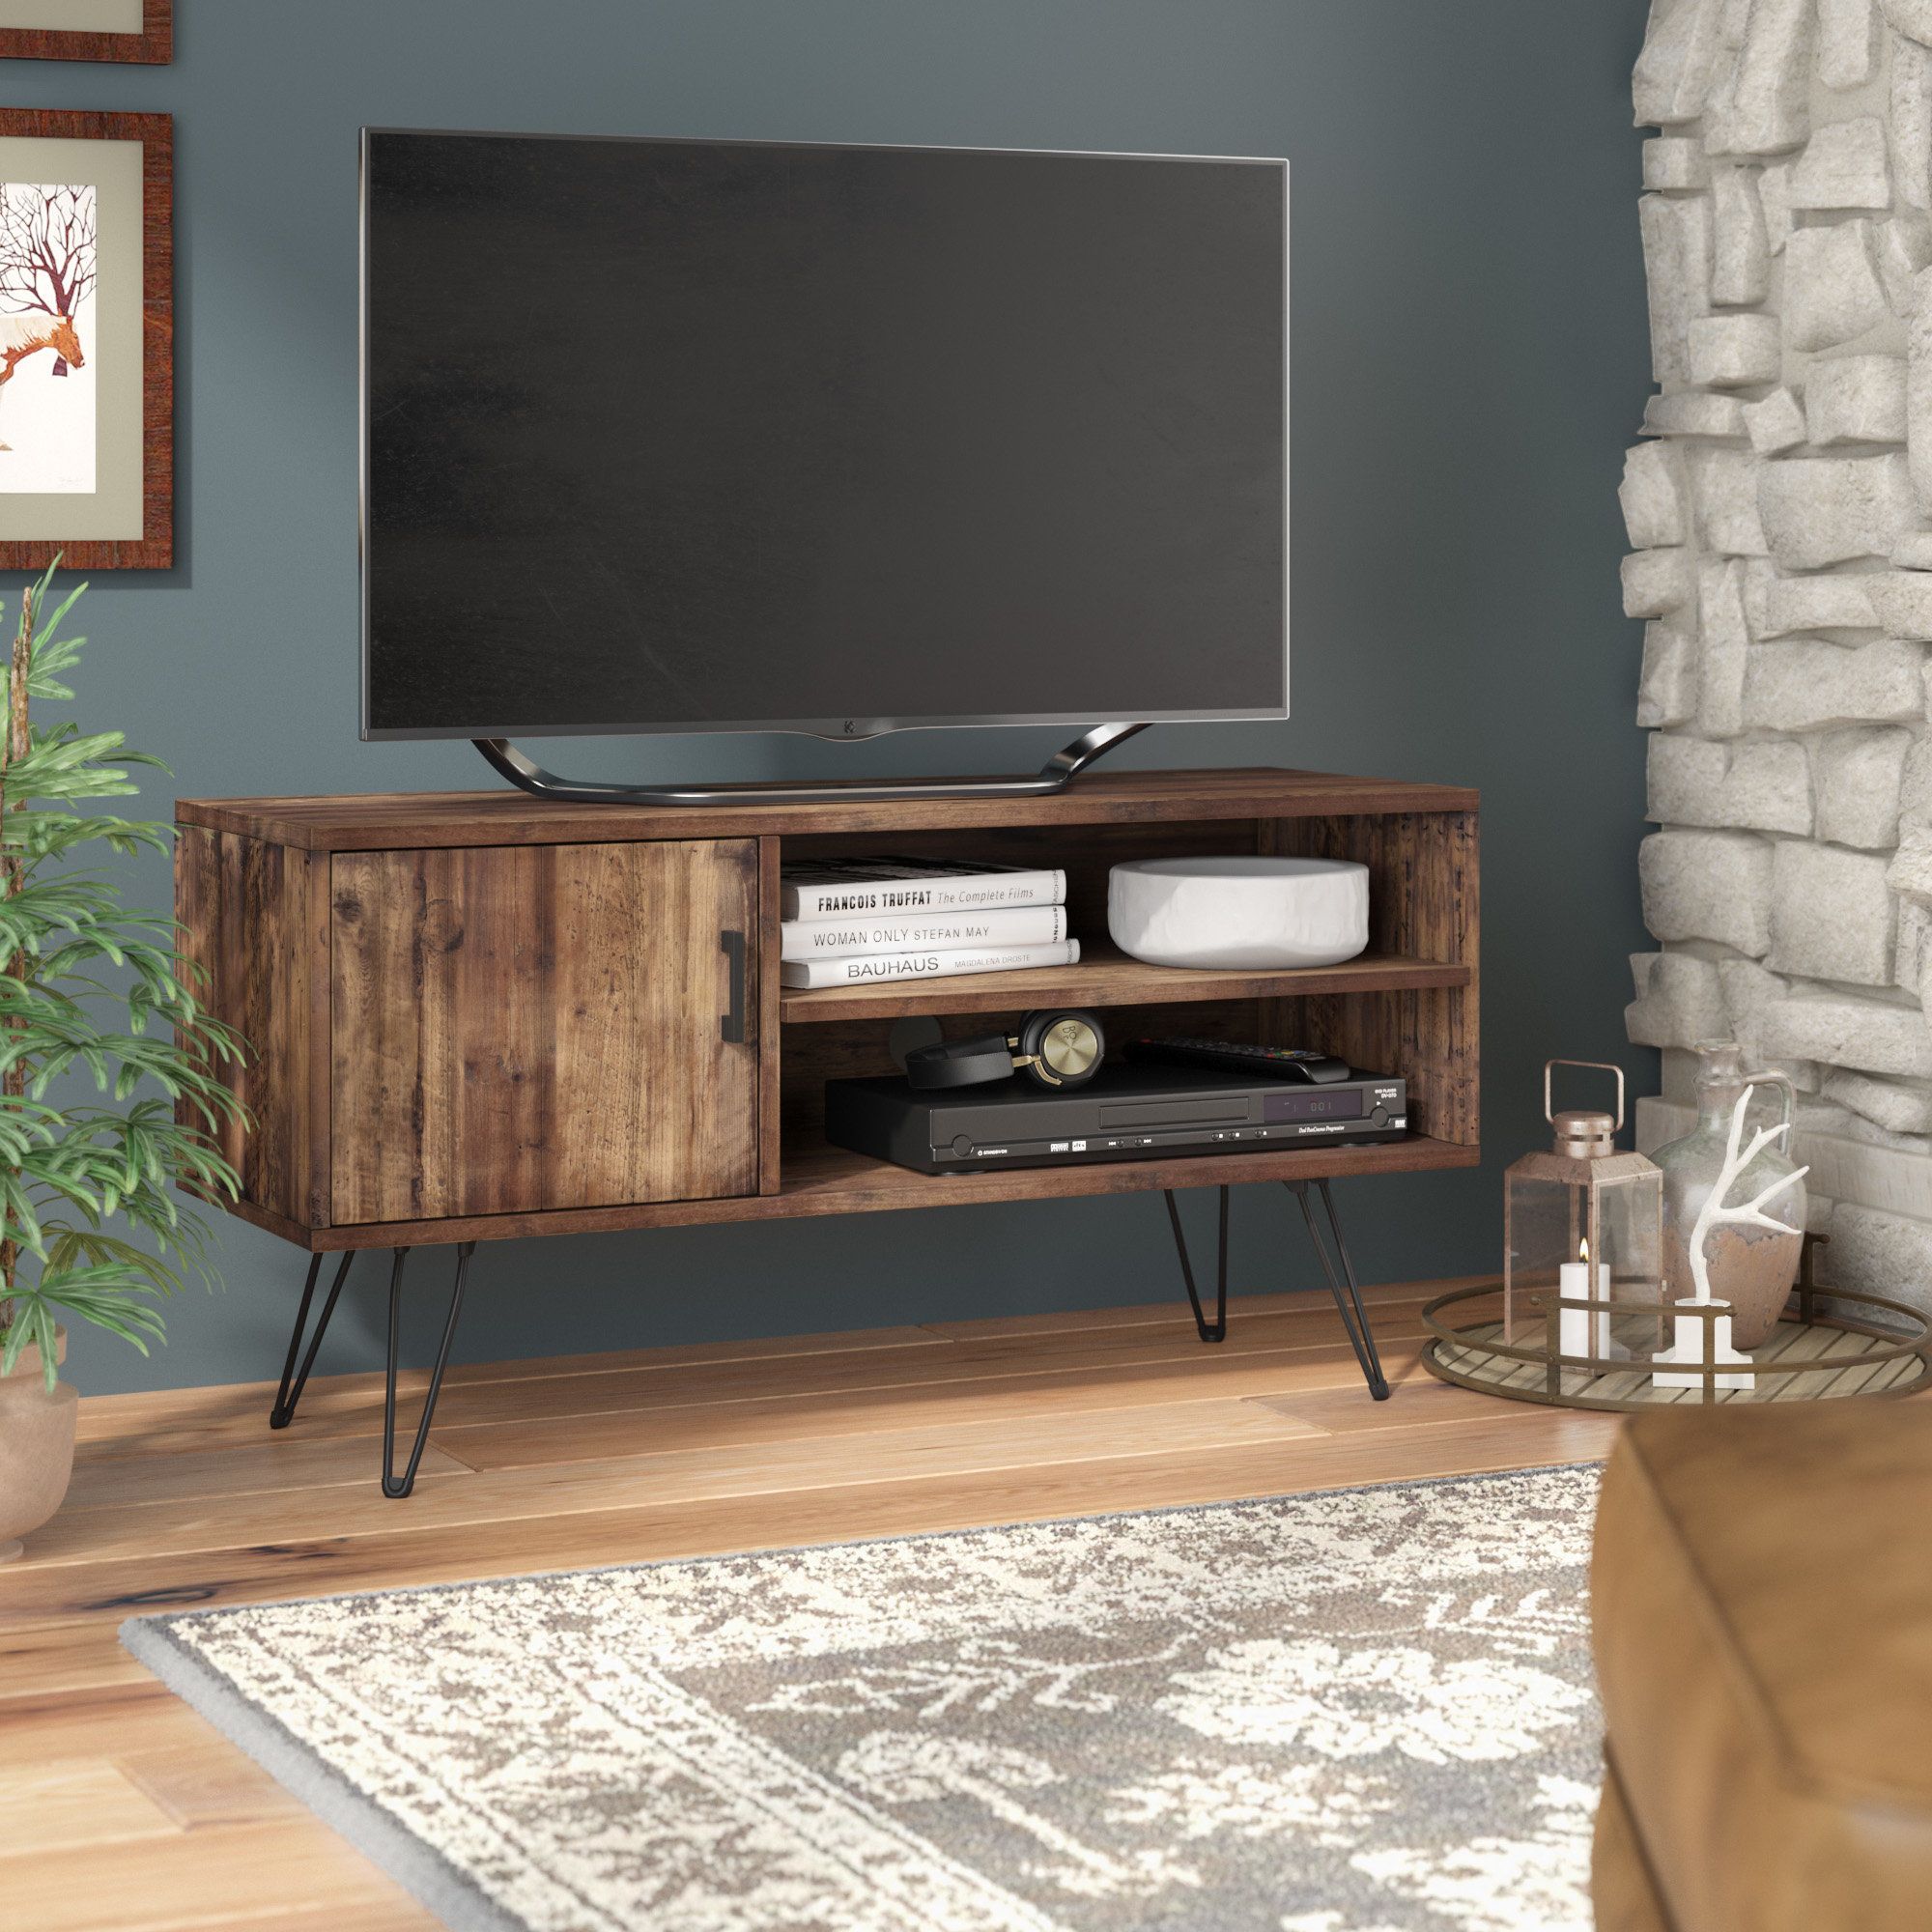 Barclee Media Tv Stand For Tvs Up To 58" In Ericka Tv Stands For Tvs Up To 42" (View 9 of 30)